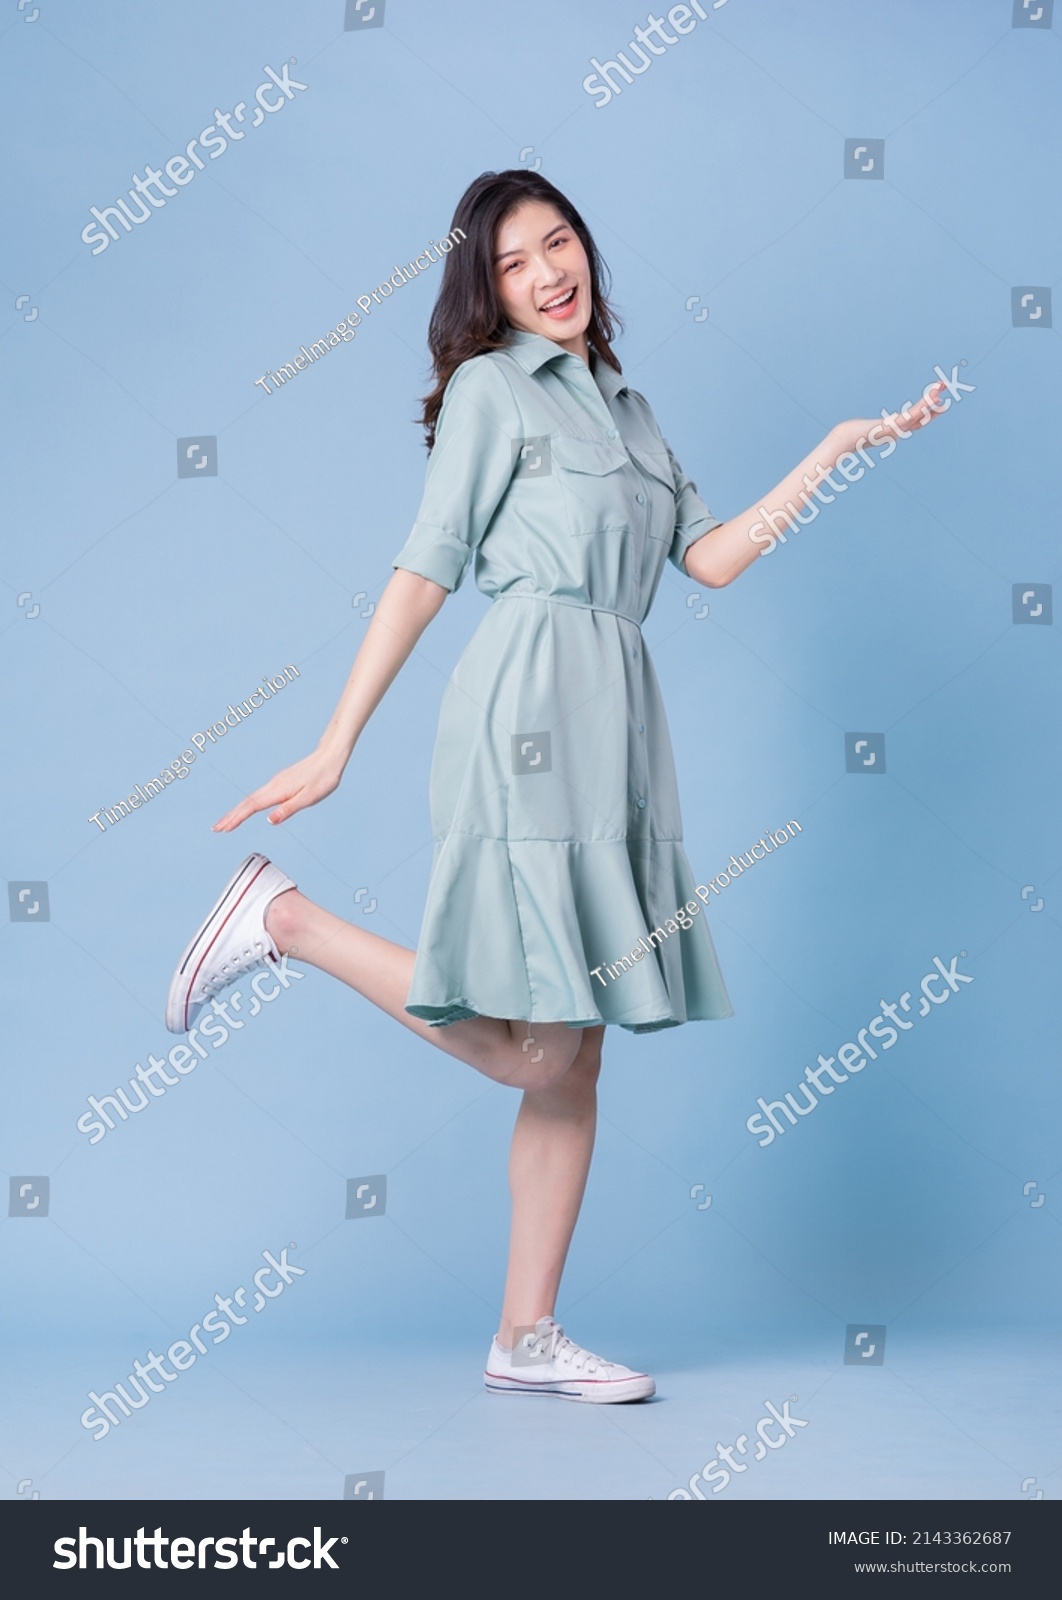 Full length image of young Asian woman wearing dress on blue background #2143362687